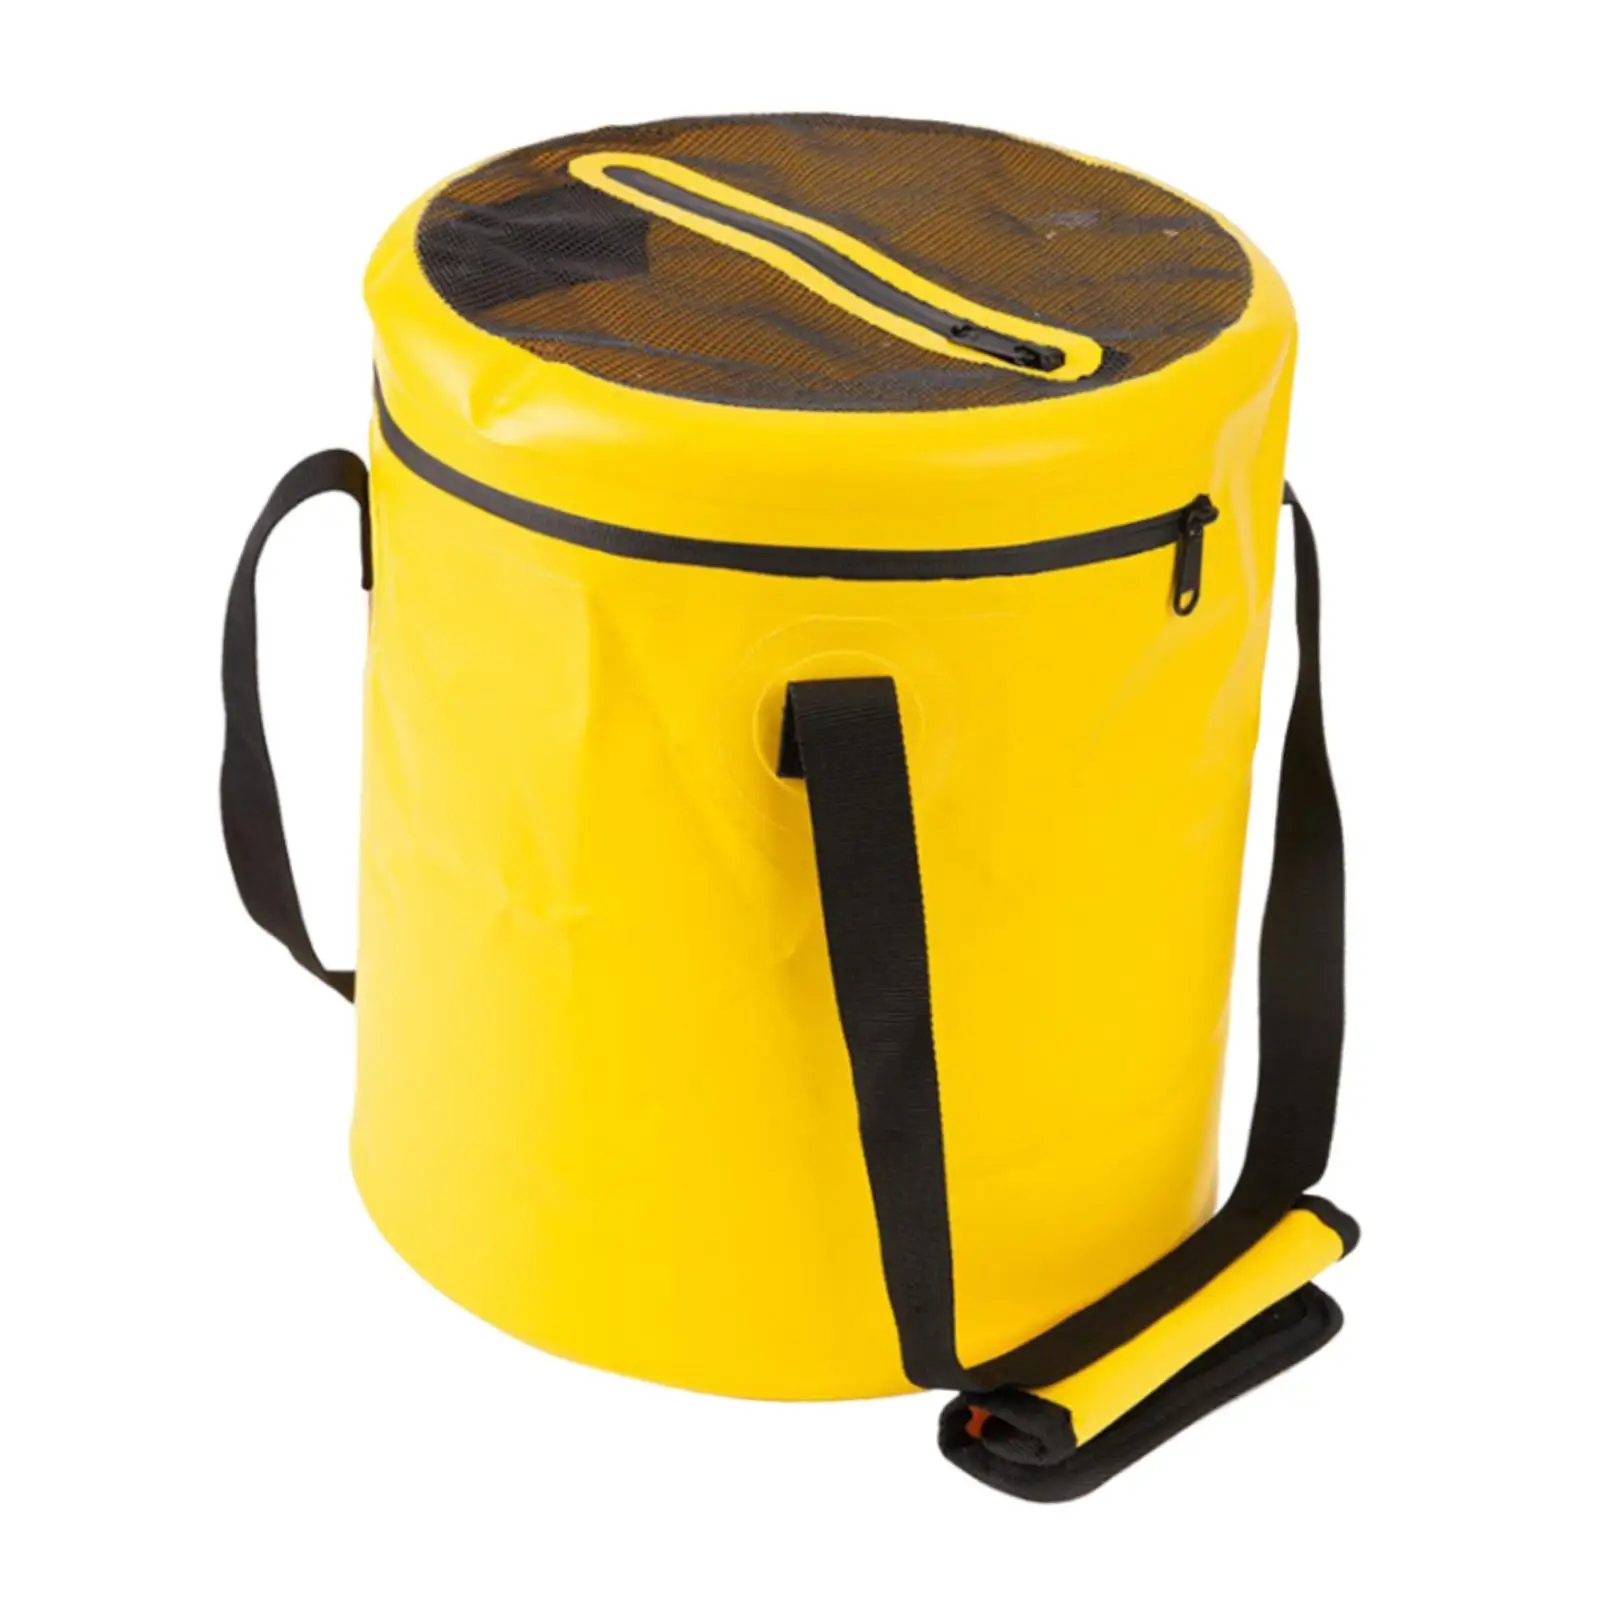 Collapsible Bucket with Lid with Lid with Handle Portable Wash Basin Folding Bucket for Camping Gardening Boating Picnic Fishing